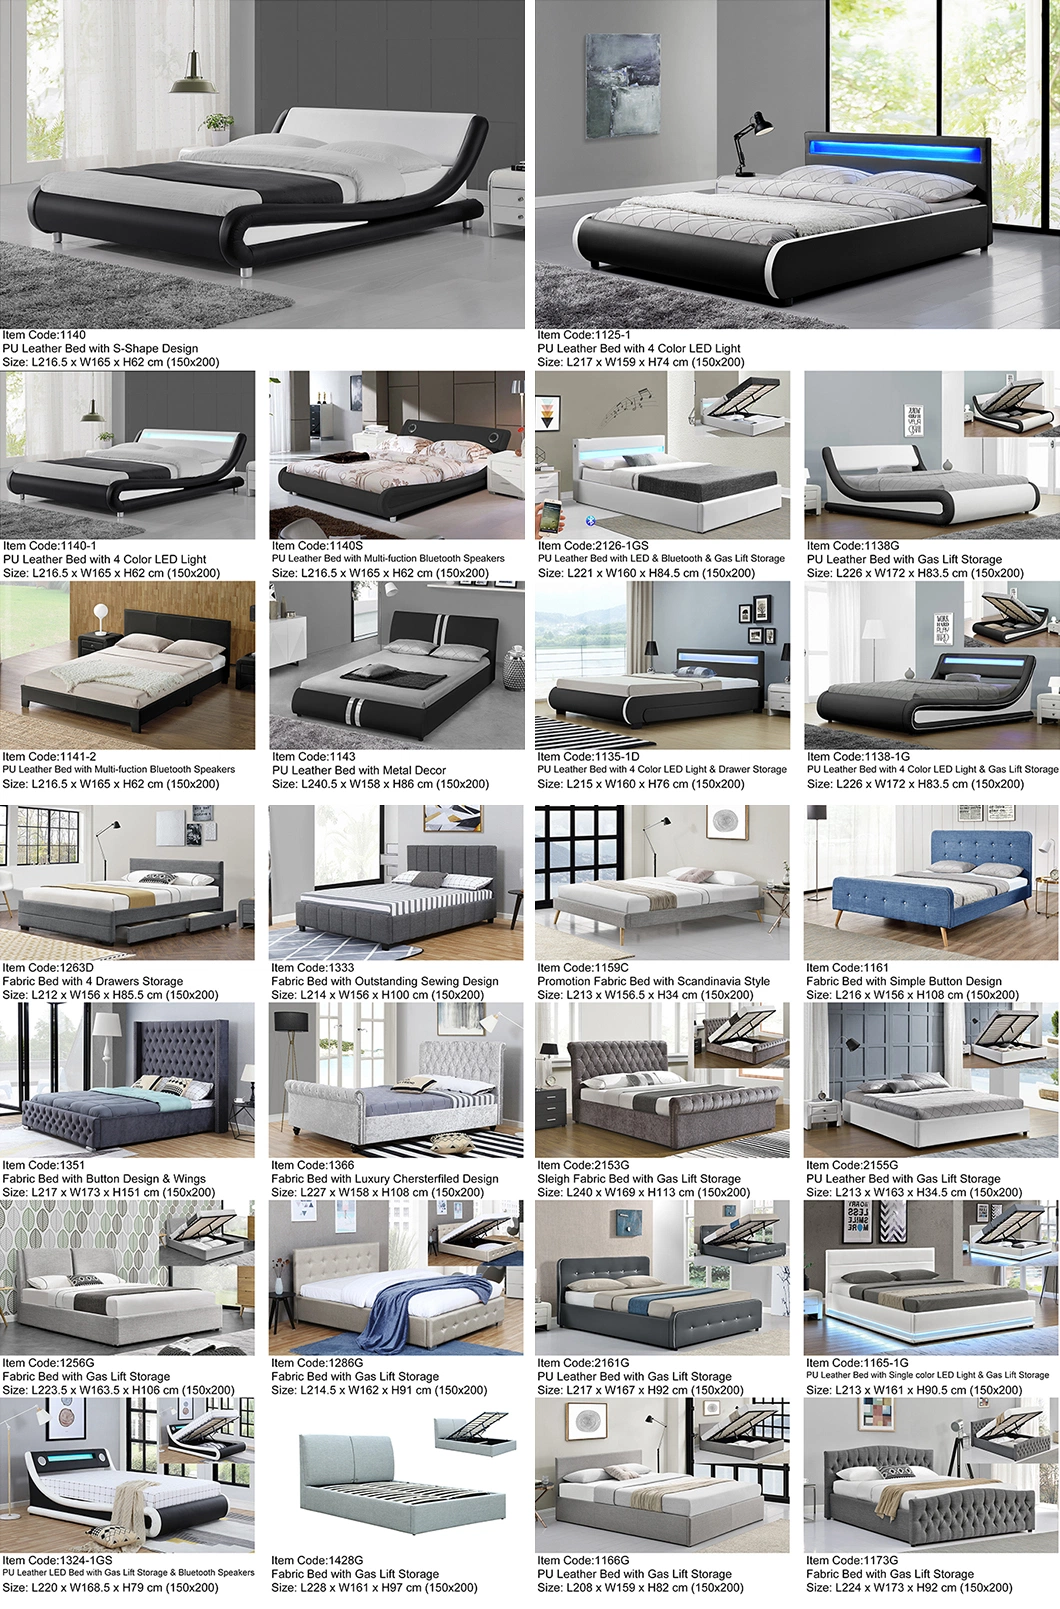 Willsoon Furniture 1398g New Store PU Leather Double/Queen/King Size Gas Lift Storage Bed Frame with Button Design